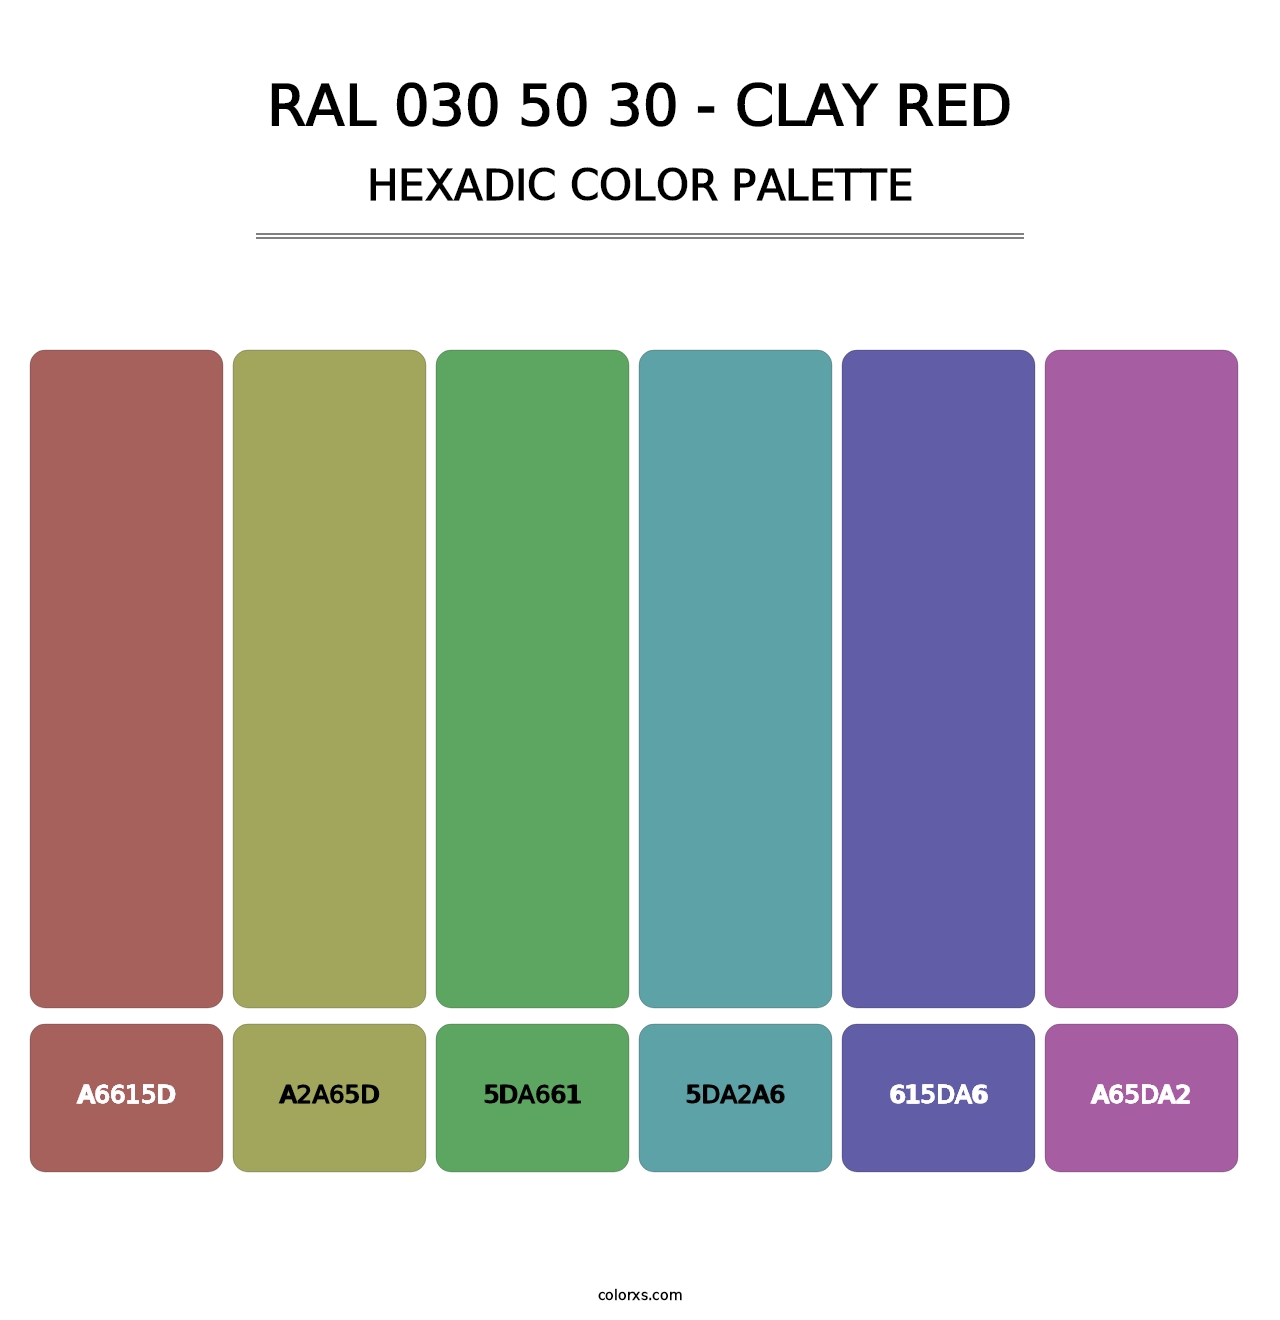 RAL 030 50 30 - Clay Red - Hexadic Color Palette